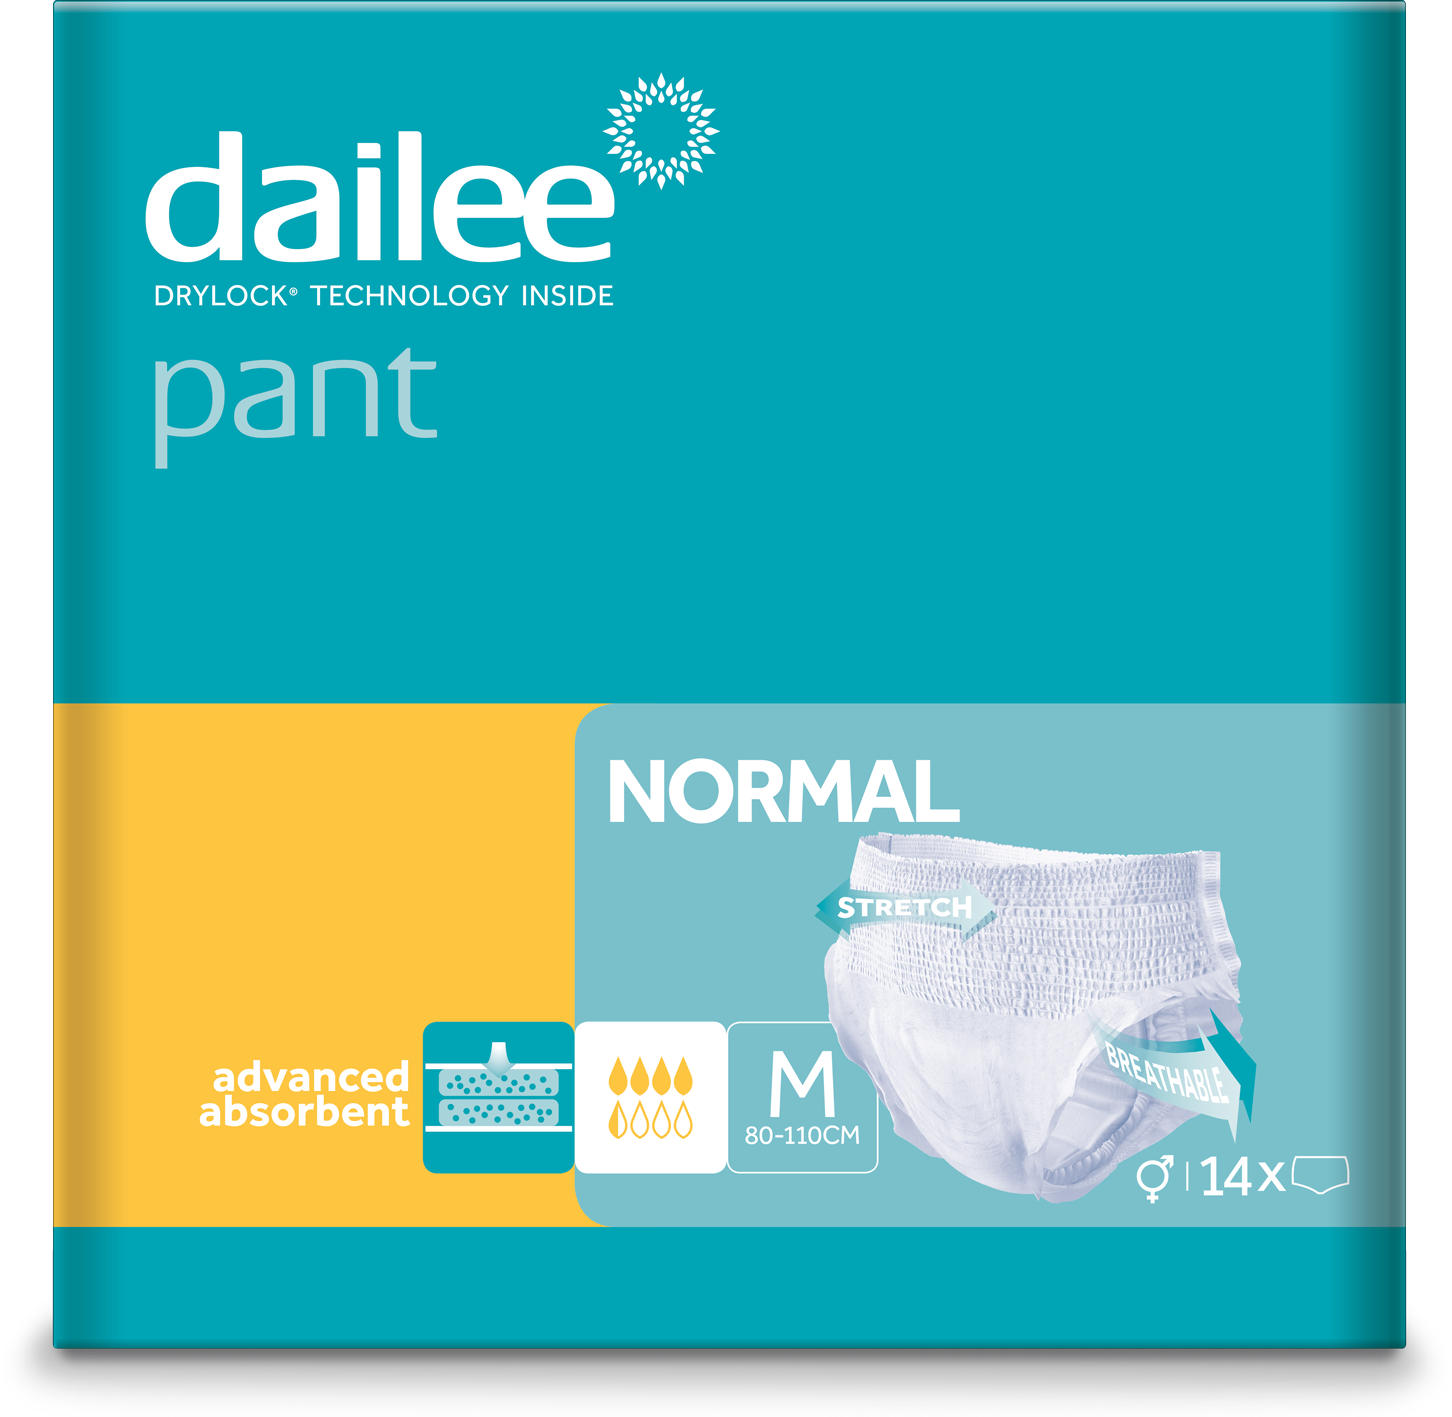 dailee pant normal